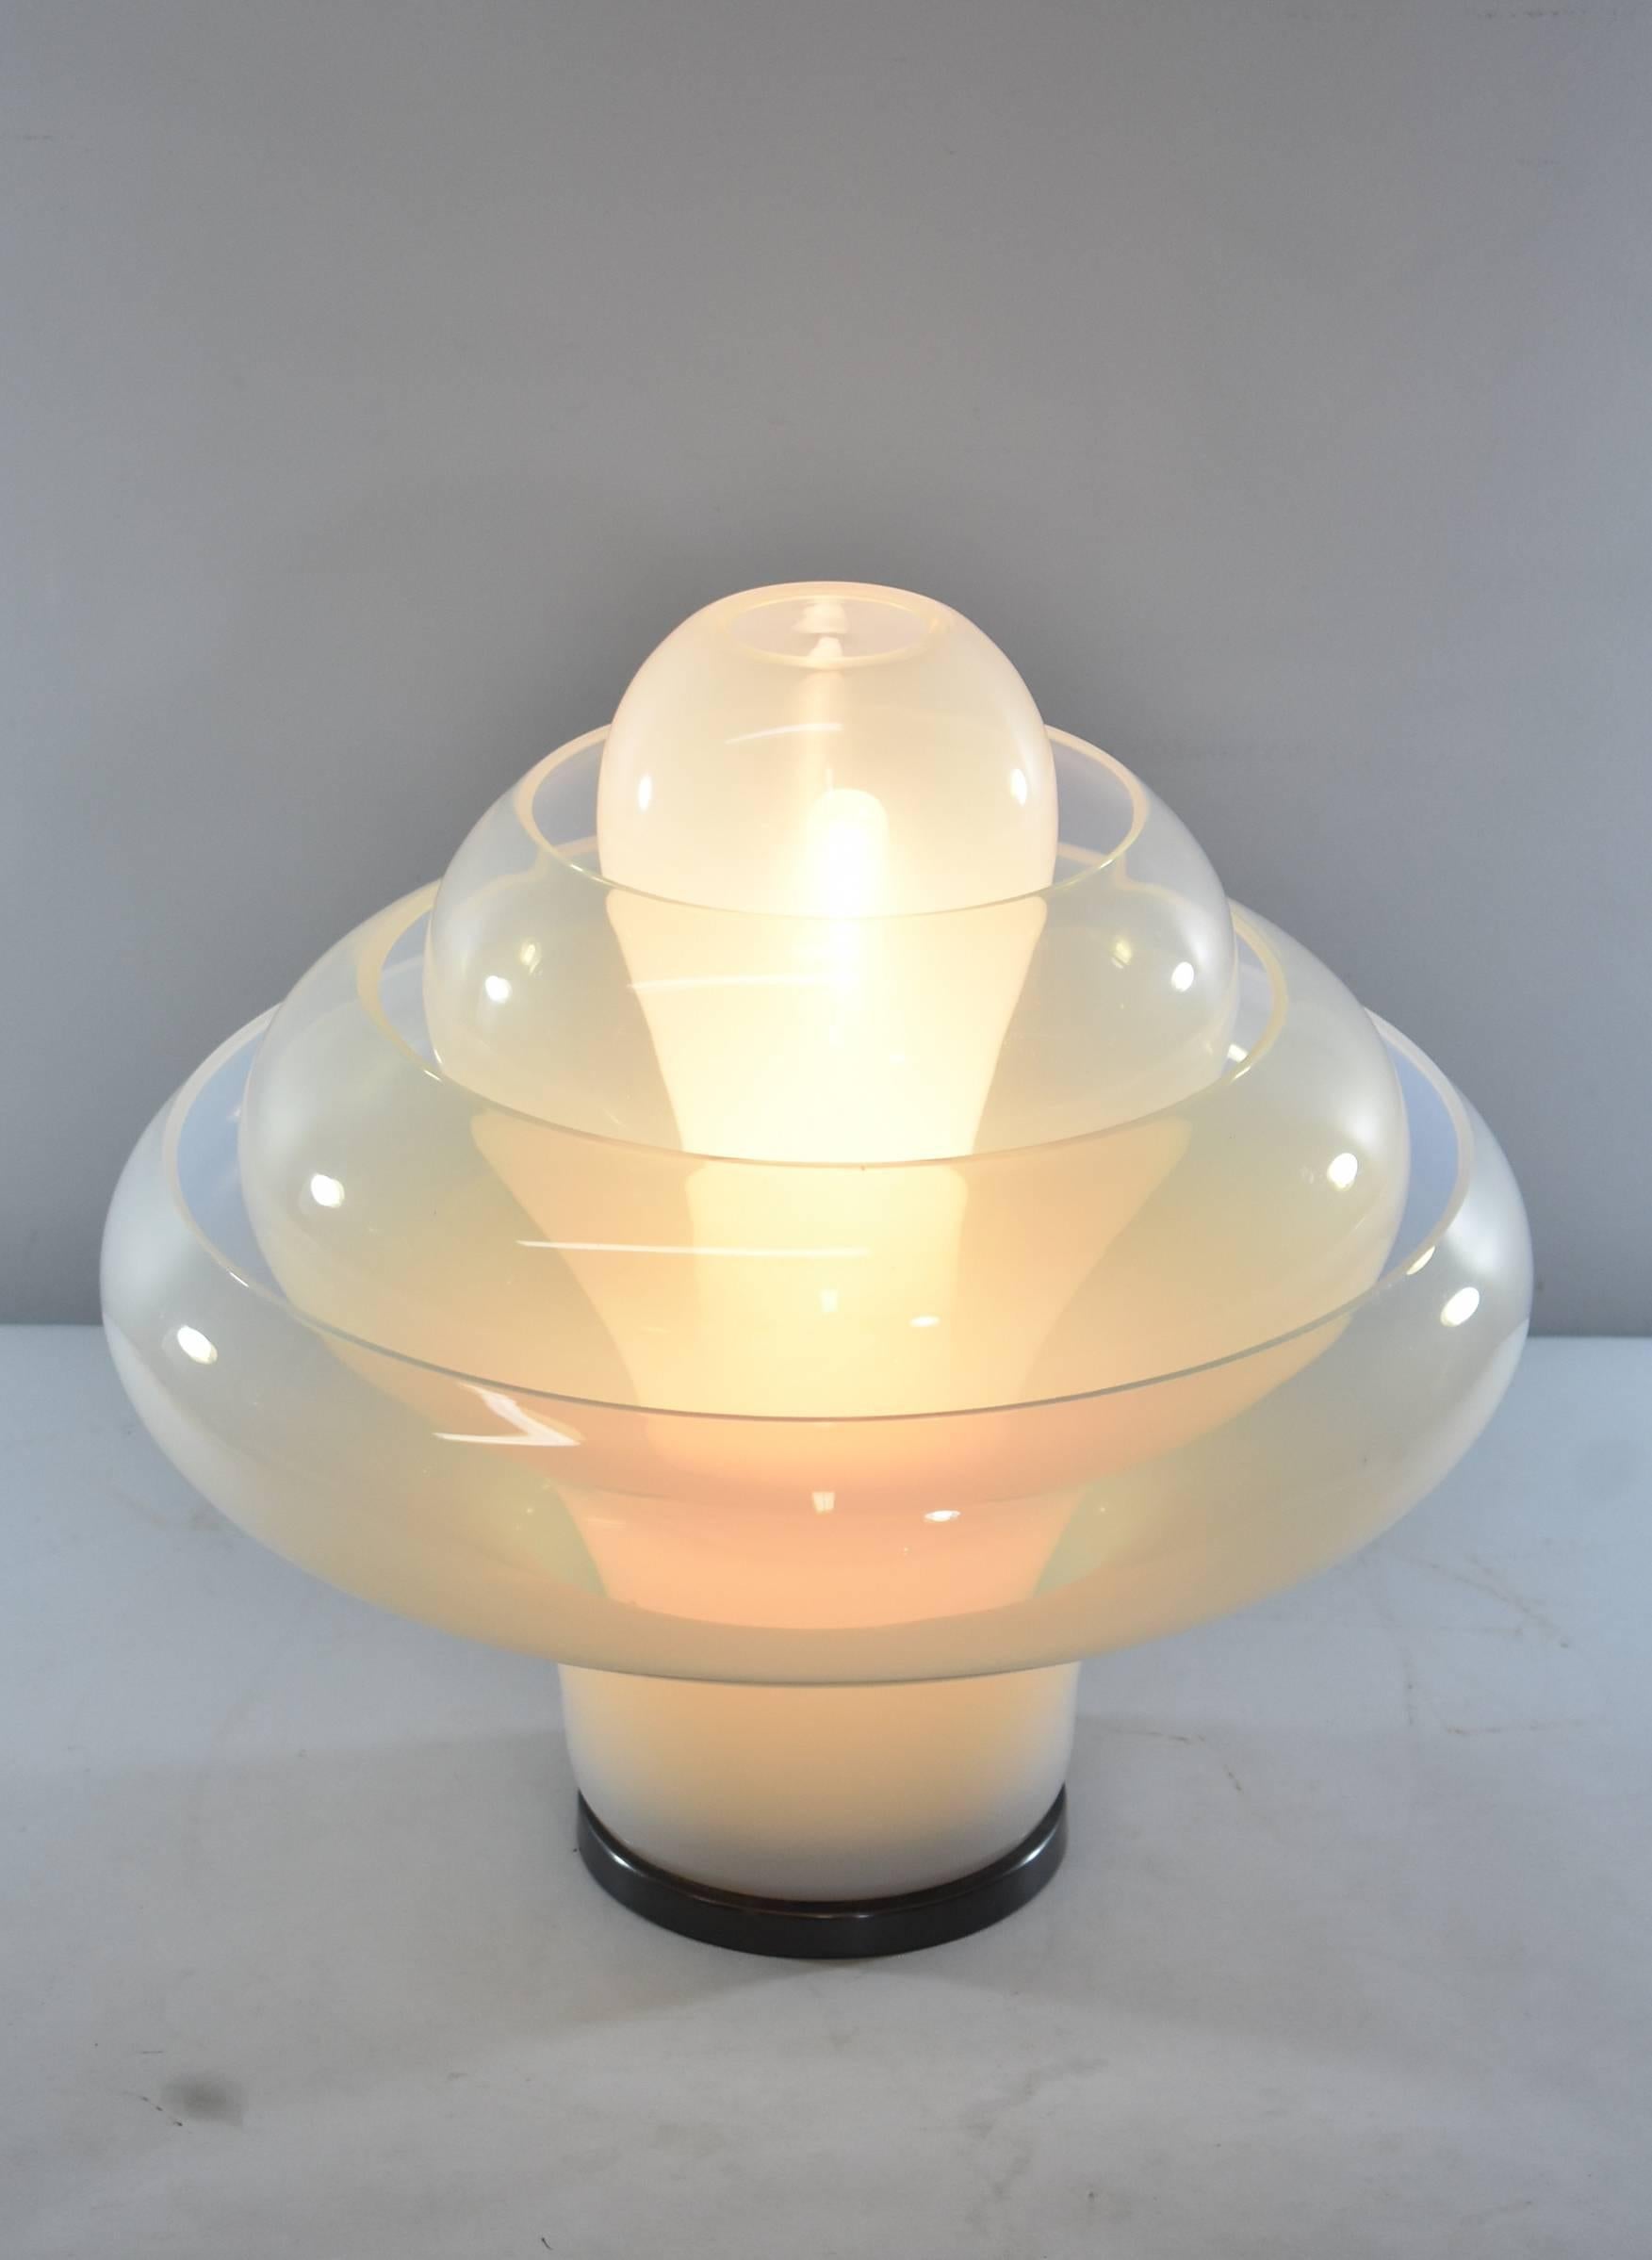 A beautiful lotus table lamp designed by Carlo Nason for Mazzega. Lamp has four layers of bollicine glass with one central light bulb. Glass layers attach to a metal base with pins. Model LT305. Cord is marked Milano.